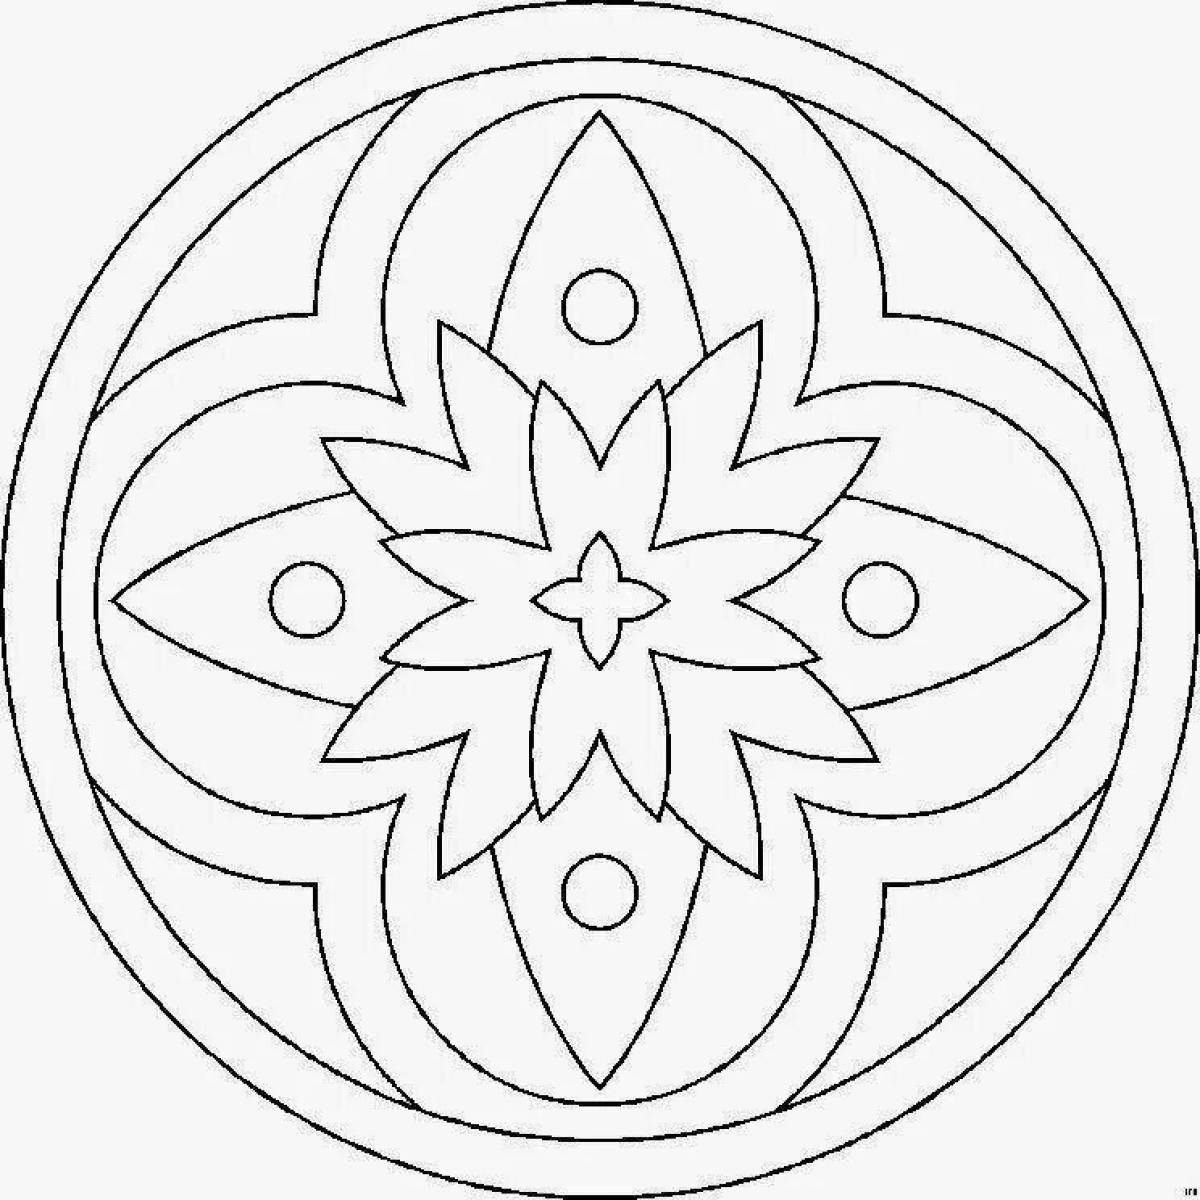 Fascinating patterns and ornaments for coloring pages